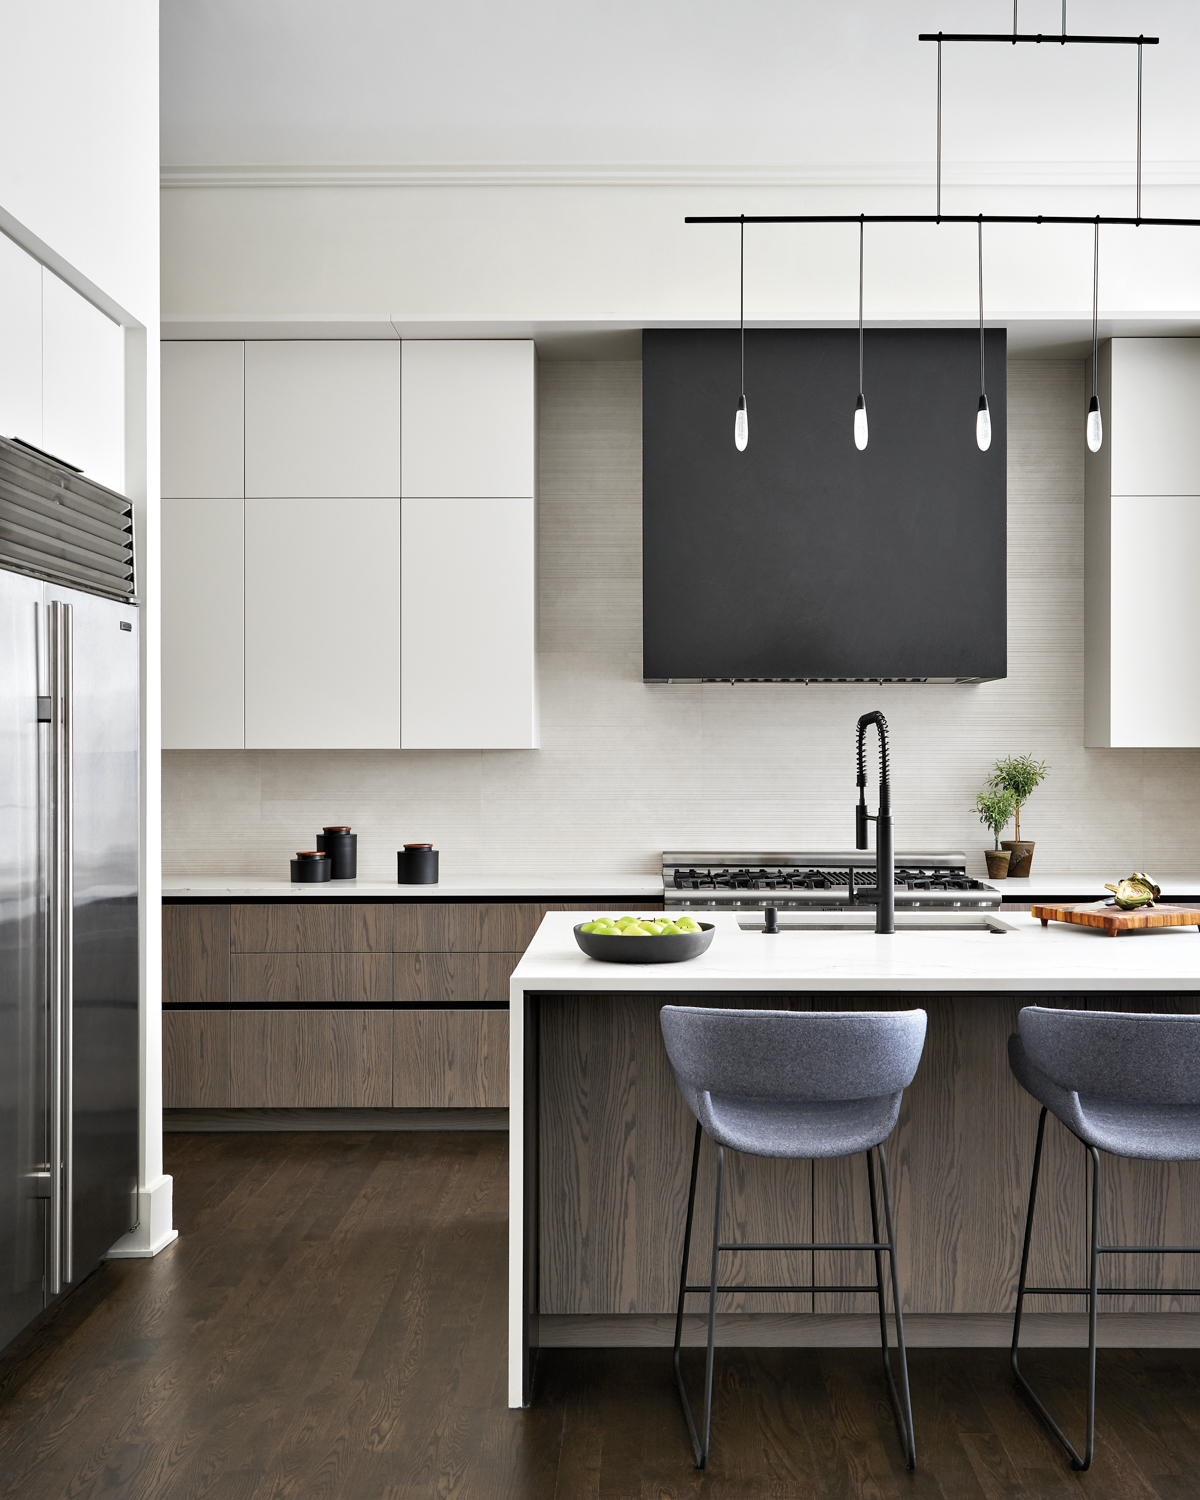 Sleek white kitchen with a black hood over the range, and gray stools by the island